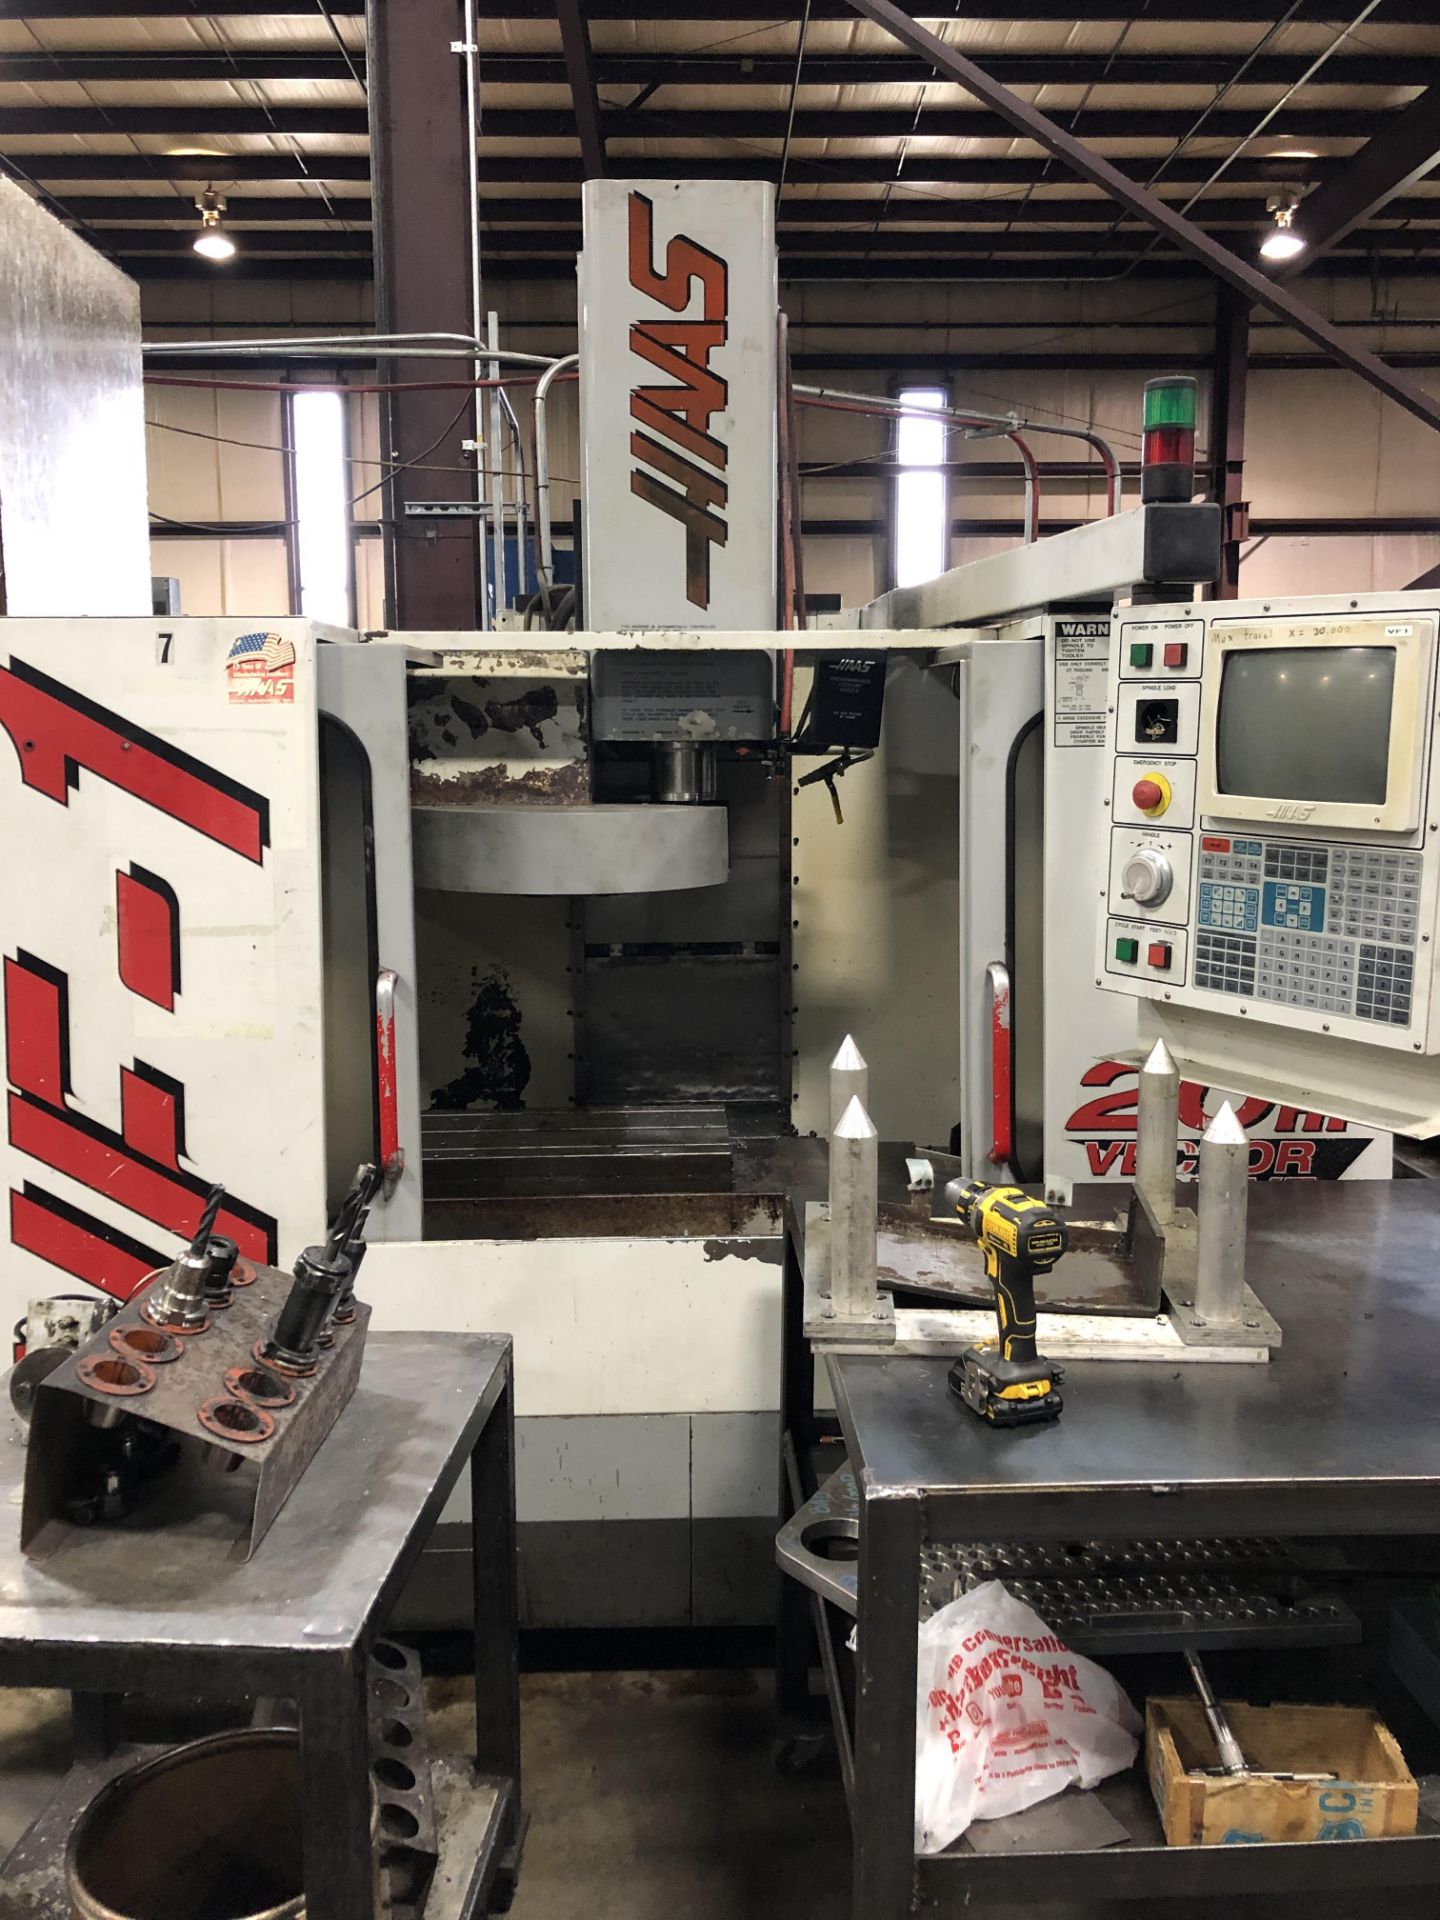 1999 HAAS VF 1 Vertical Machining Center - Image 2 of 8